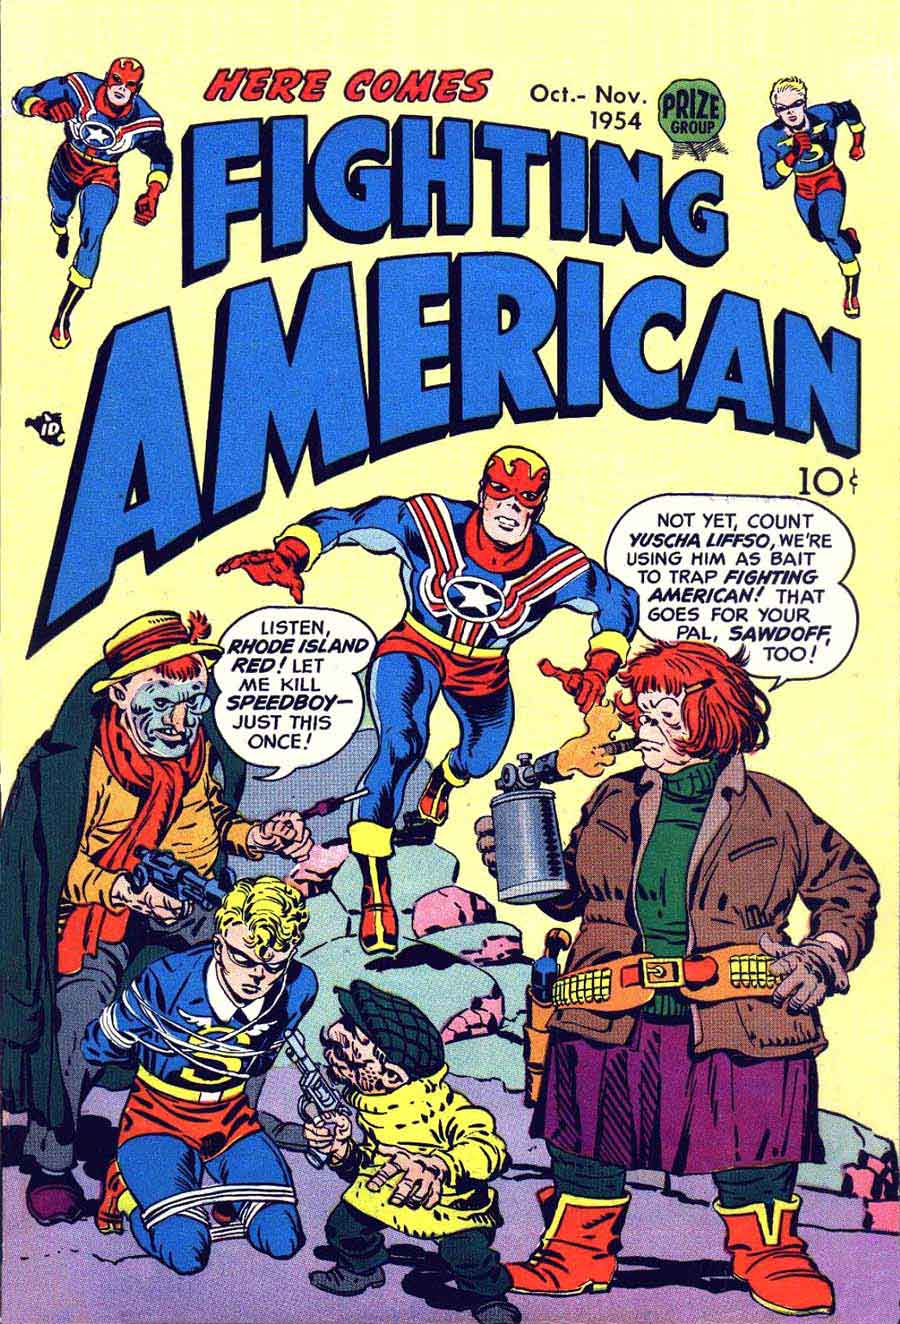 Fighting American v1 #4 harvey comic book cover art by Jack Kirby